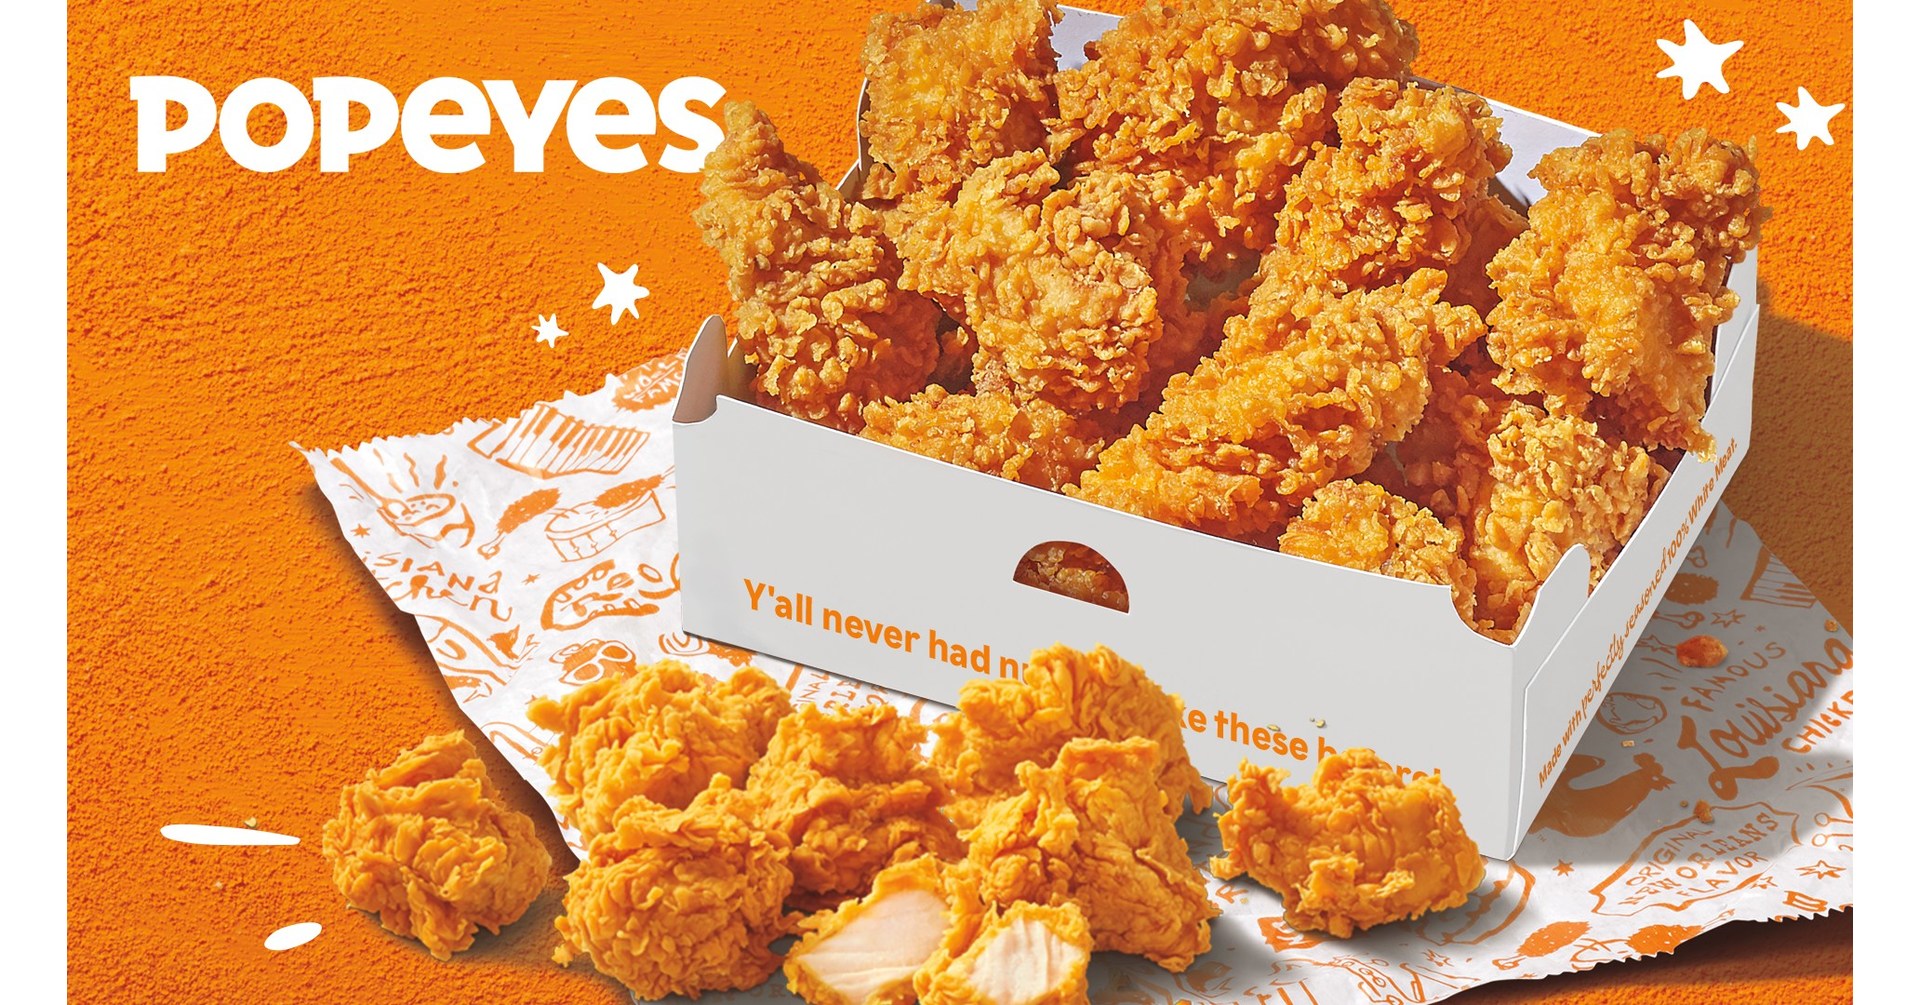 POPEYES® OPENS ITS 300TH RESTAURANT IN CANADA, CONTINUING THE BRAND'S RAPID  GROWTH ACROSS THE COUNTRY